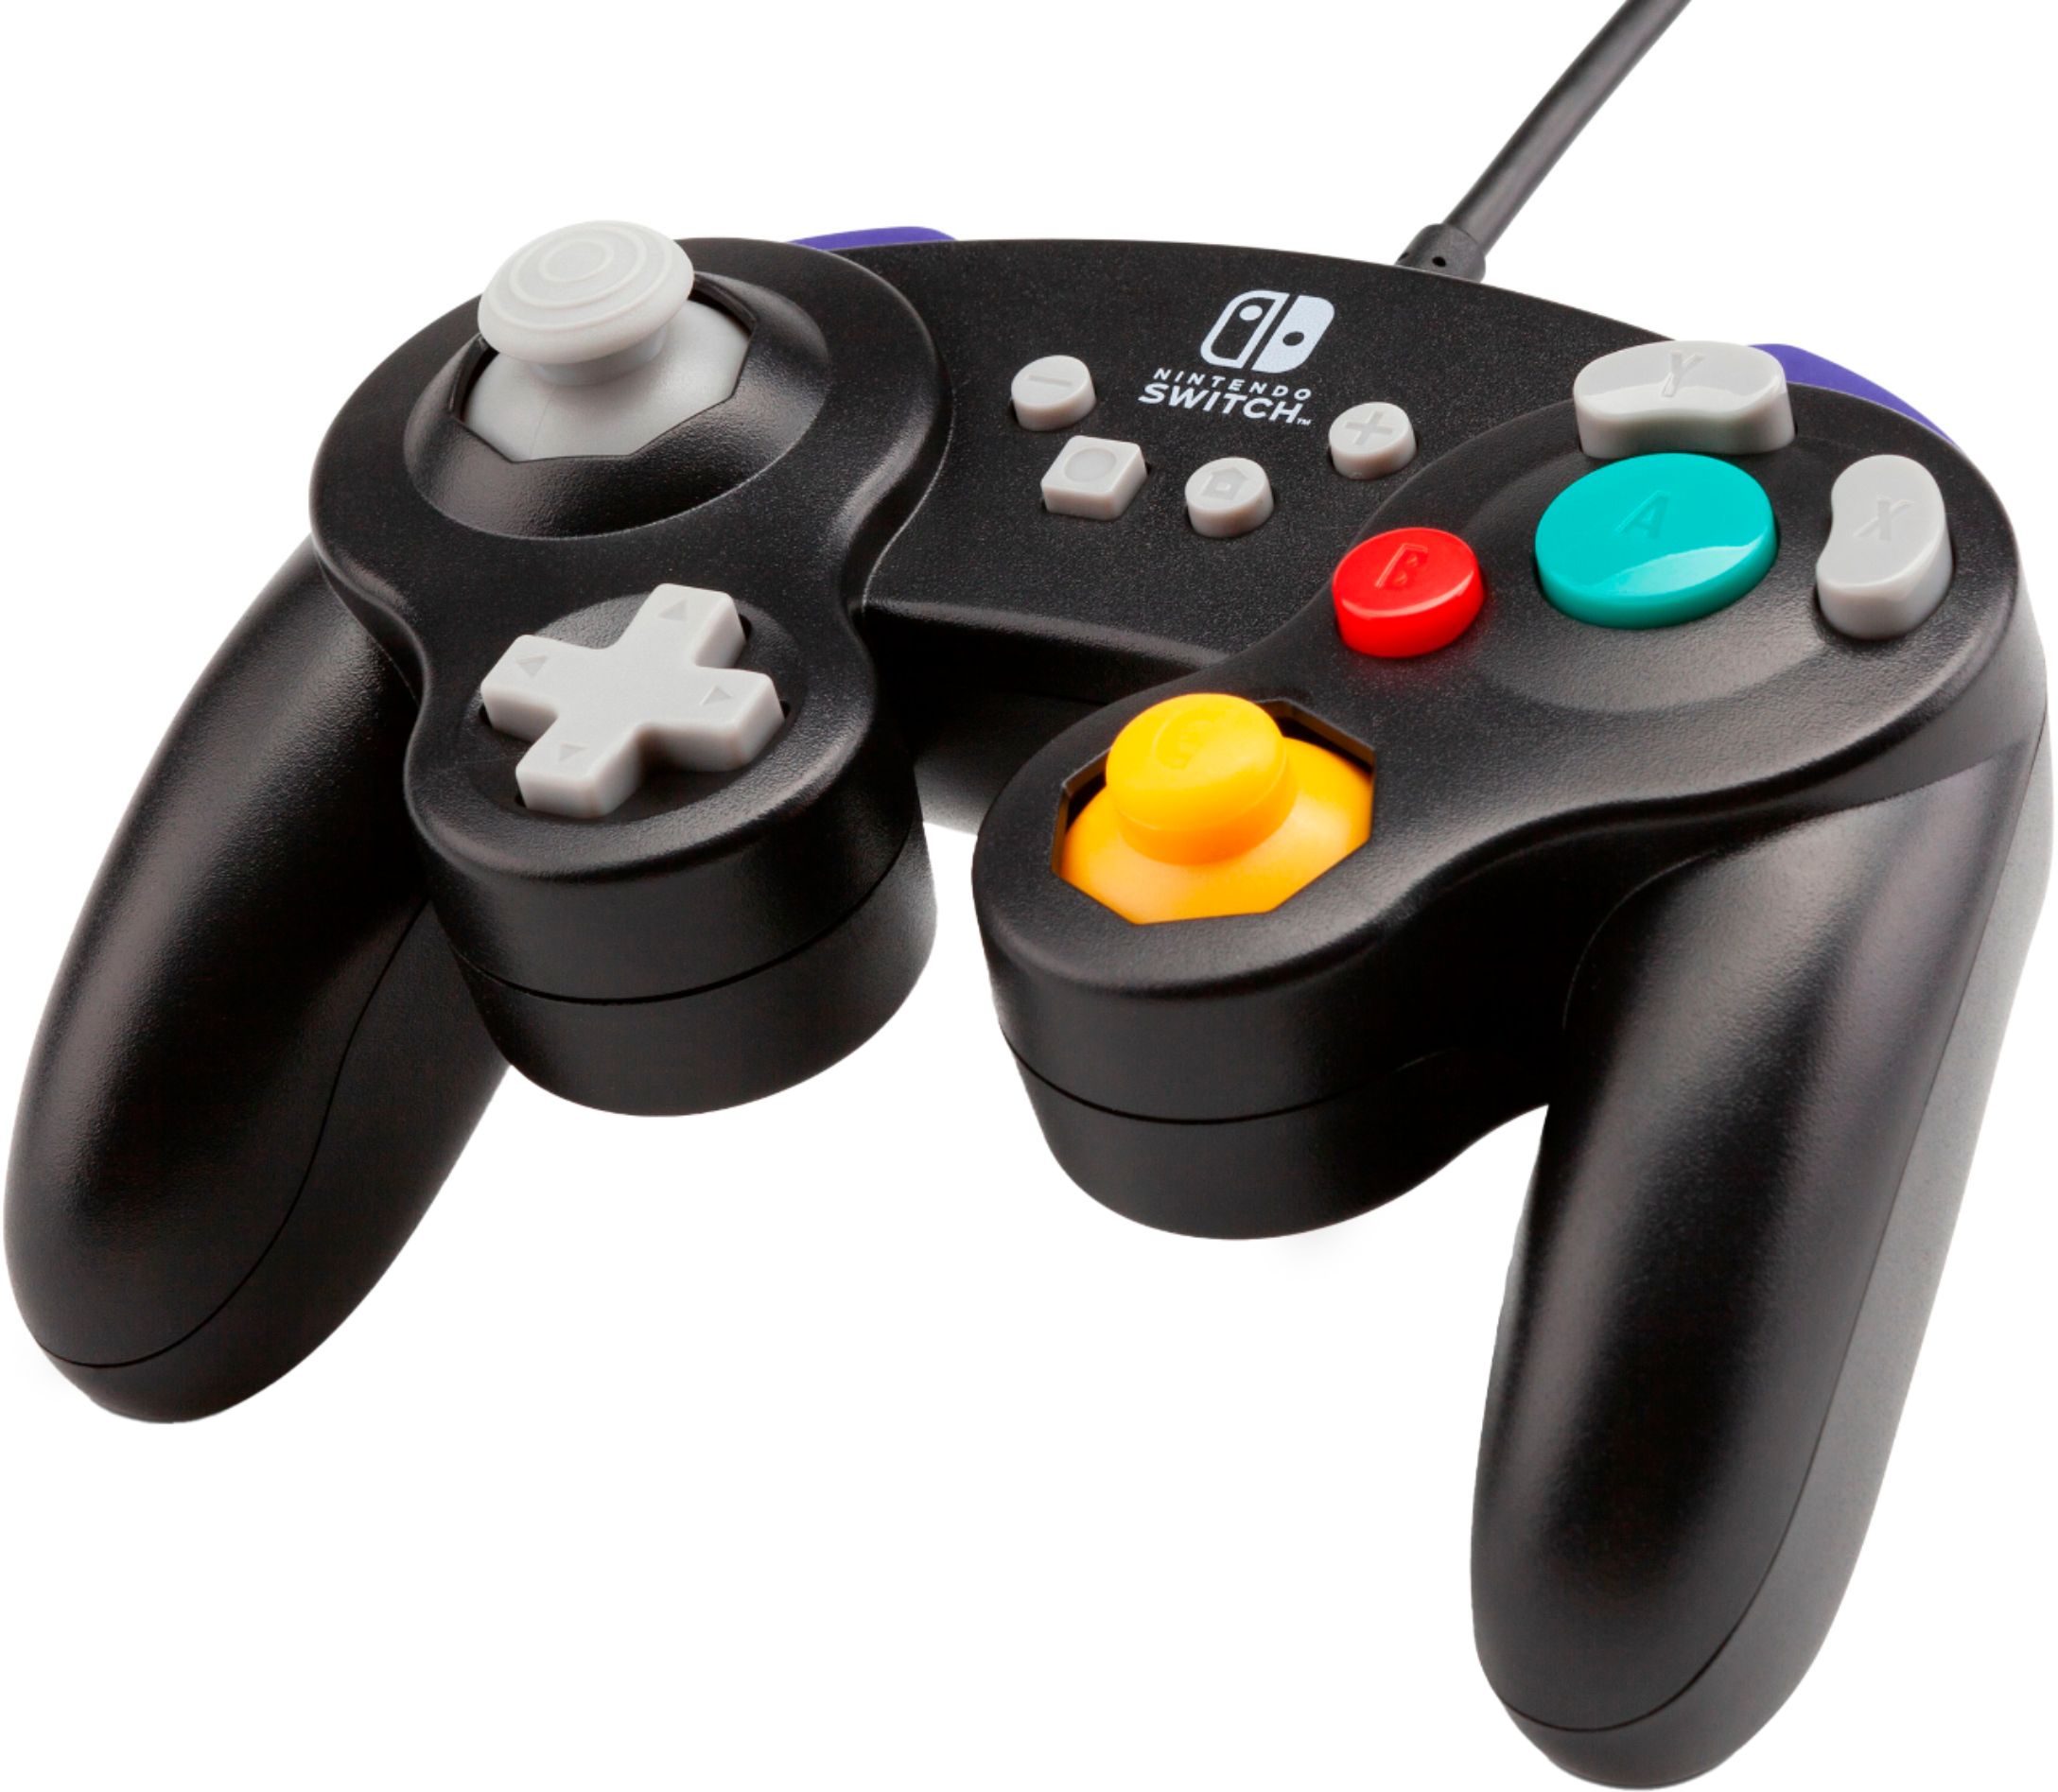 how to use a gamecube controller on pc